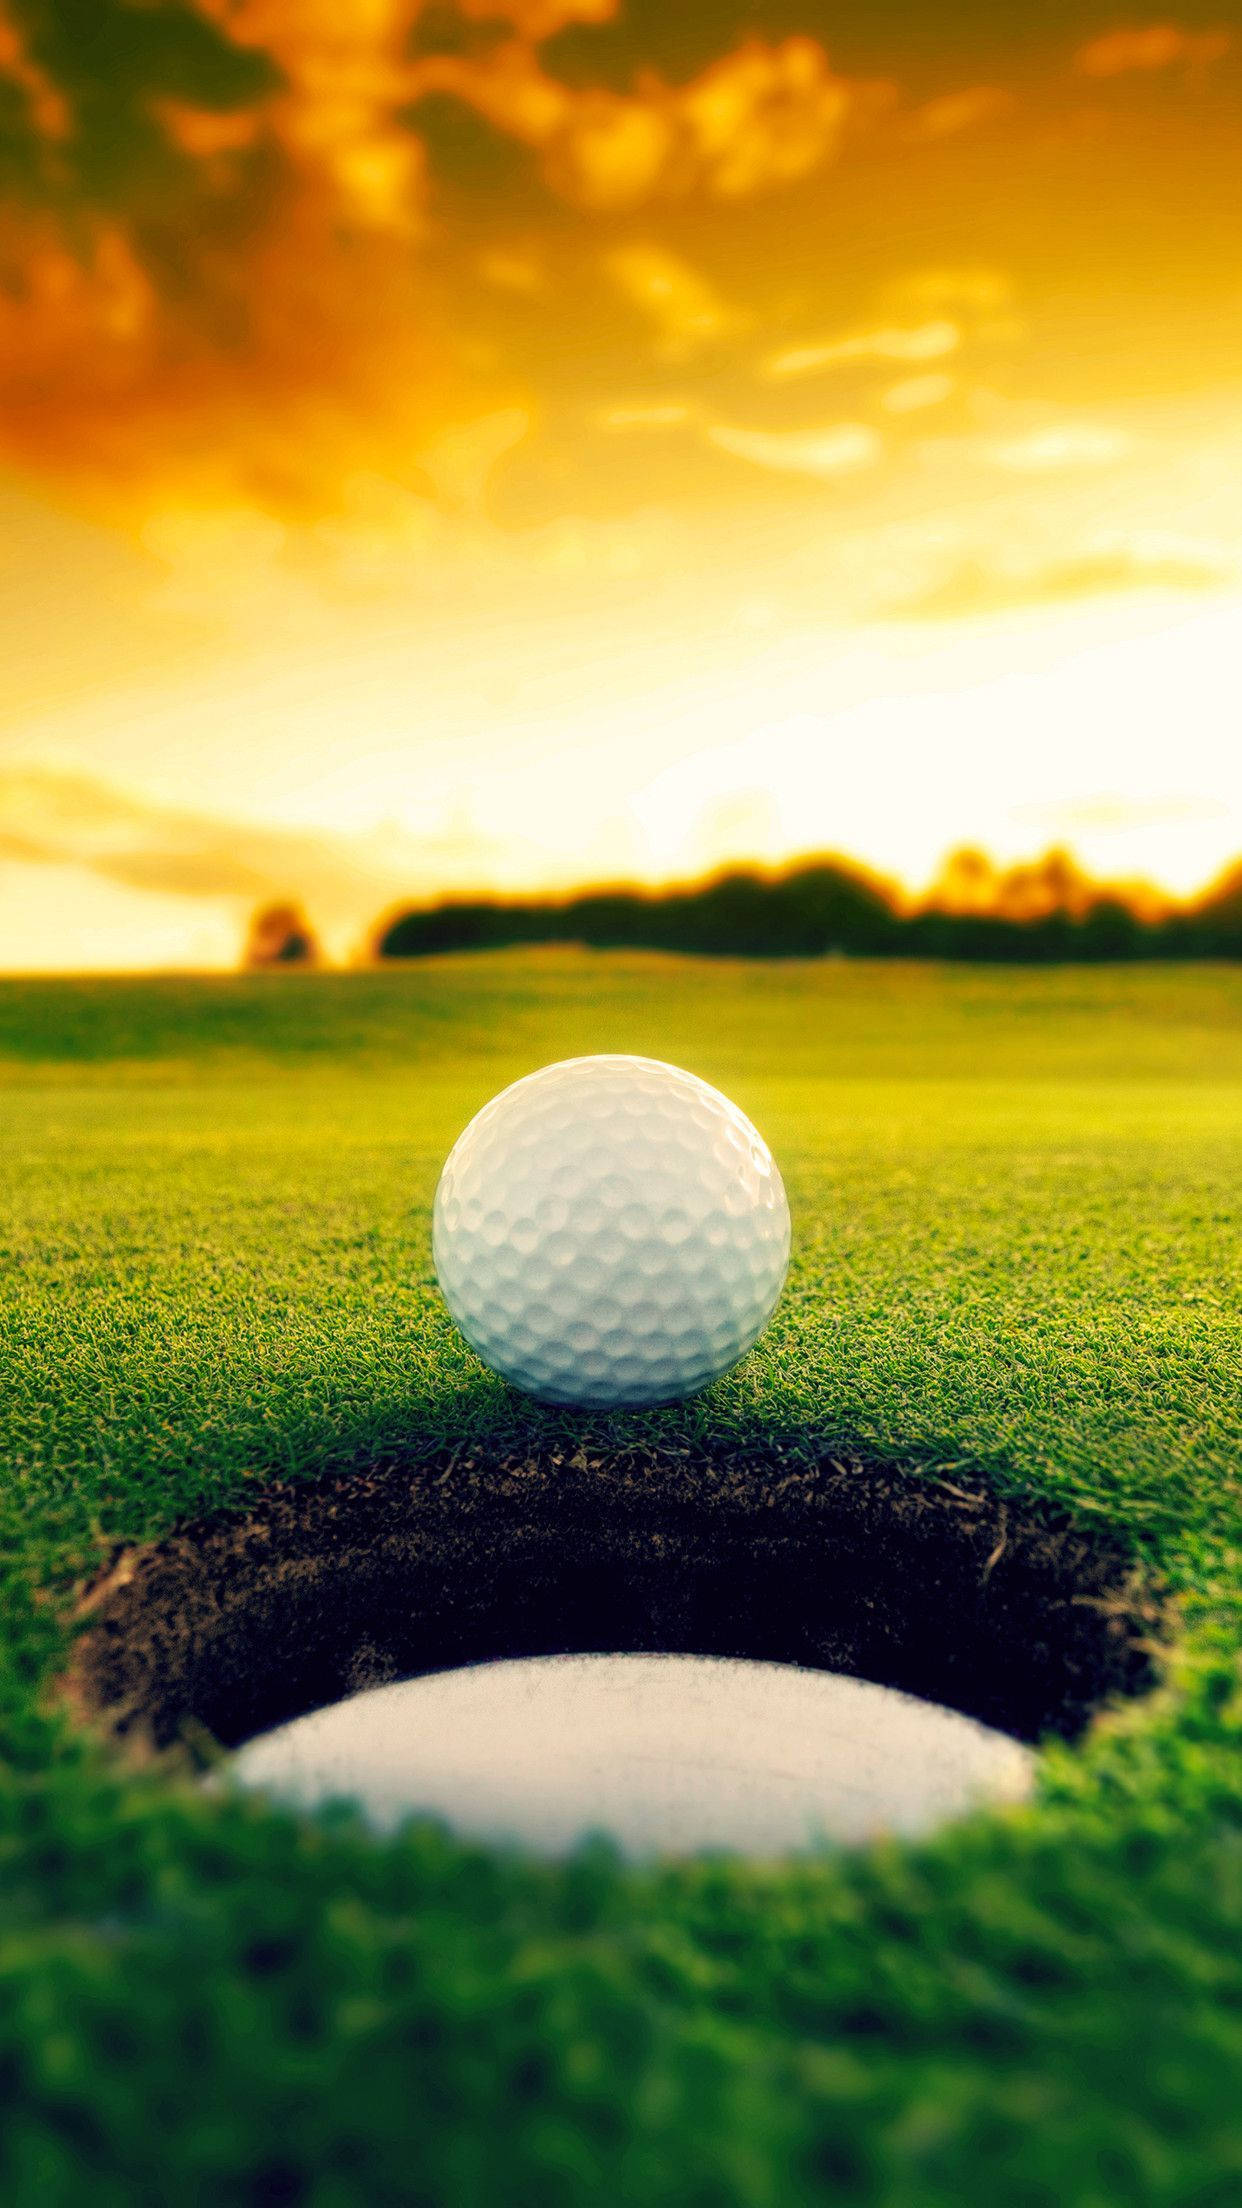 Cool Golf Ball Beside The Goal Background